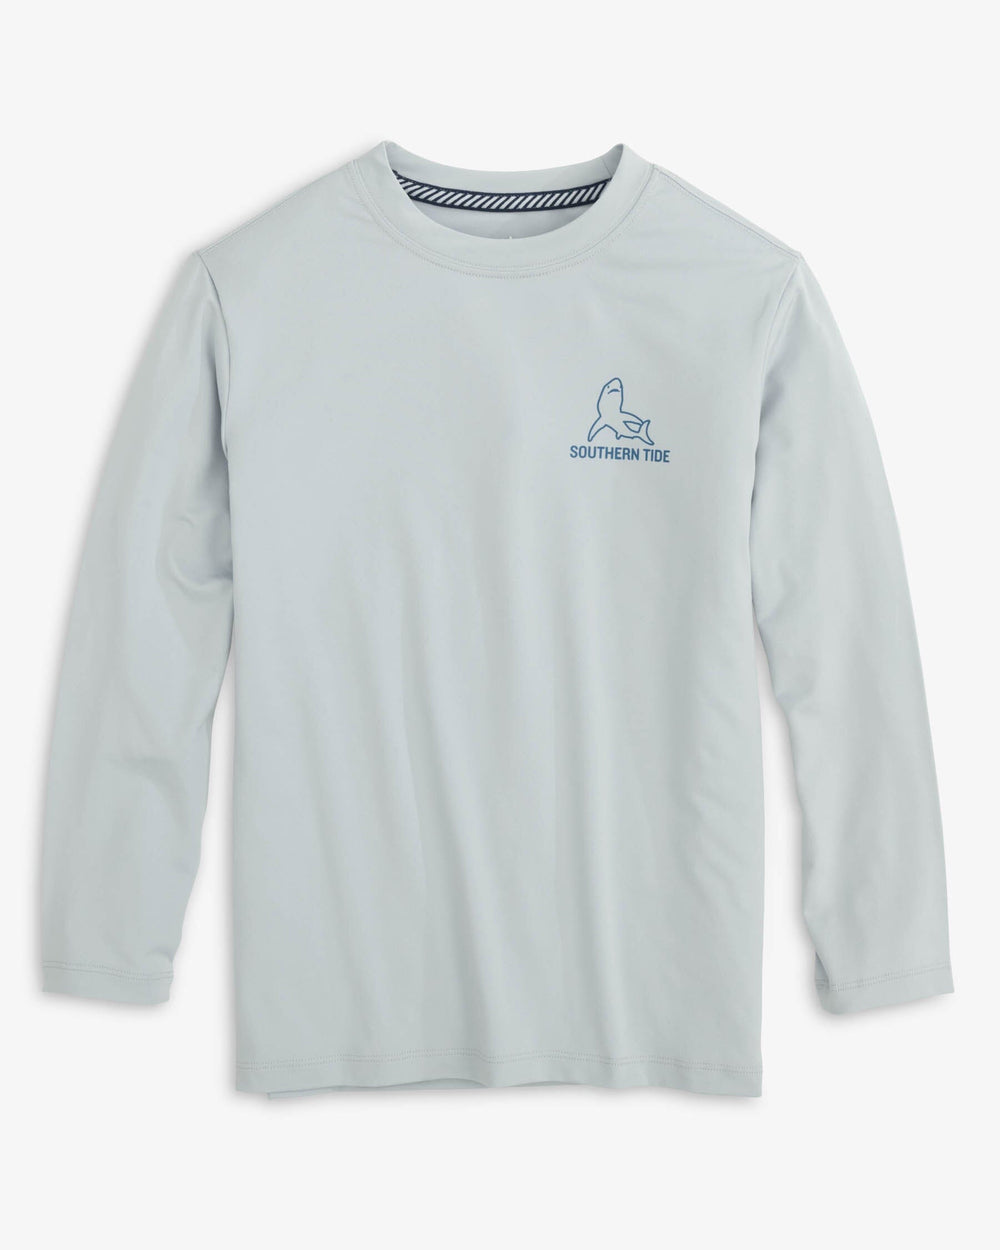 The front view of the Southern Tide Youth Lined Shark Long Sleeve Performance T-Shirt by Southern Tide - Slate Grey